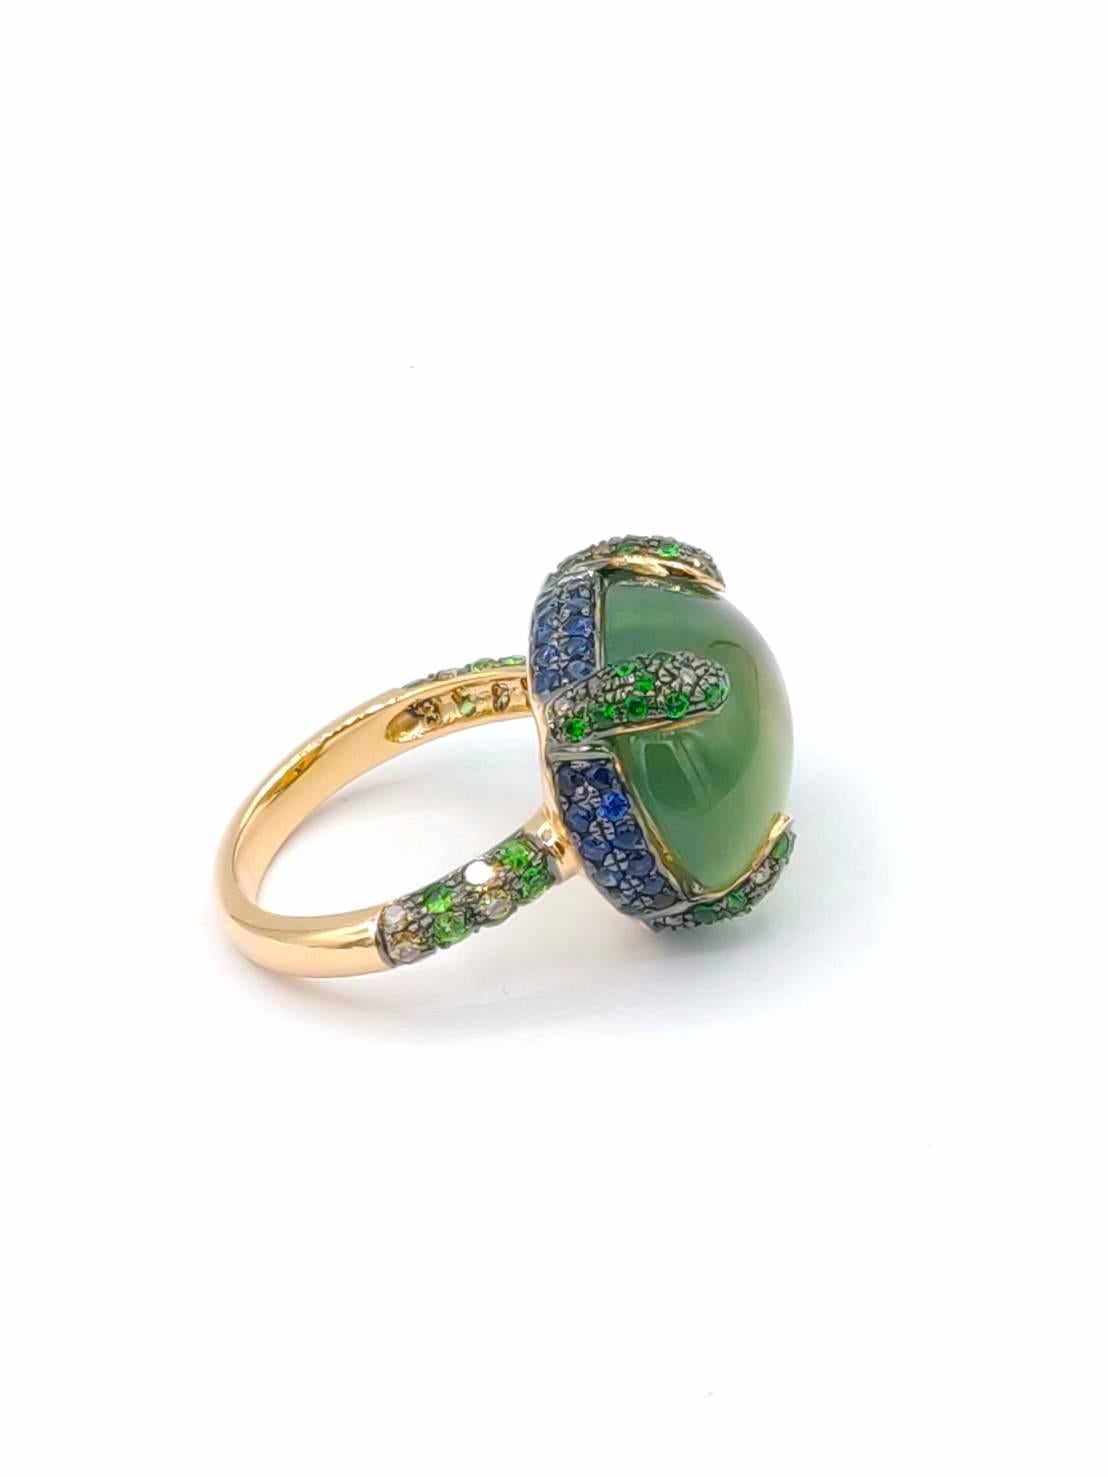 Simple 4-Prong 18K Rose Gold Ring crowned with muscat candy Cabochon Prehnite and pavé set with Blue Sapphire at the bezel, Tsavorite and Champagne Diamond at the prongs and the shoulder down to the shank

Gold: 18K Rose Gold
Prehnite: Cabochon